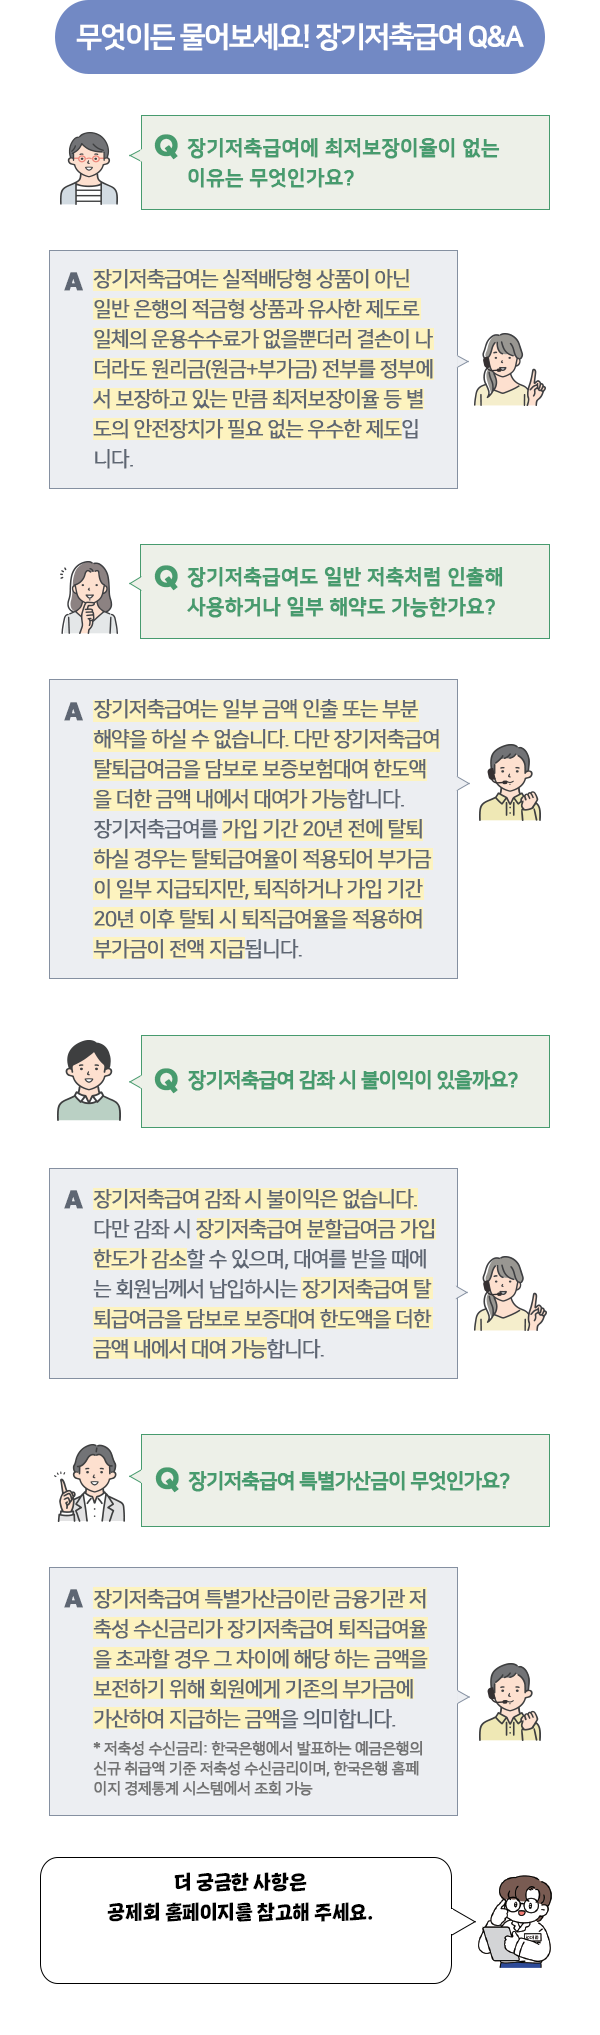 The-K 포커스 1_01